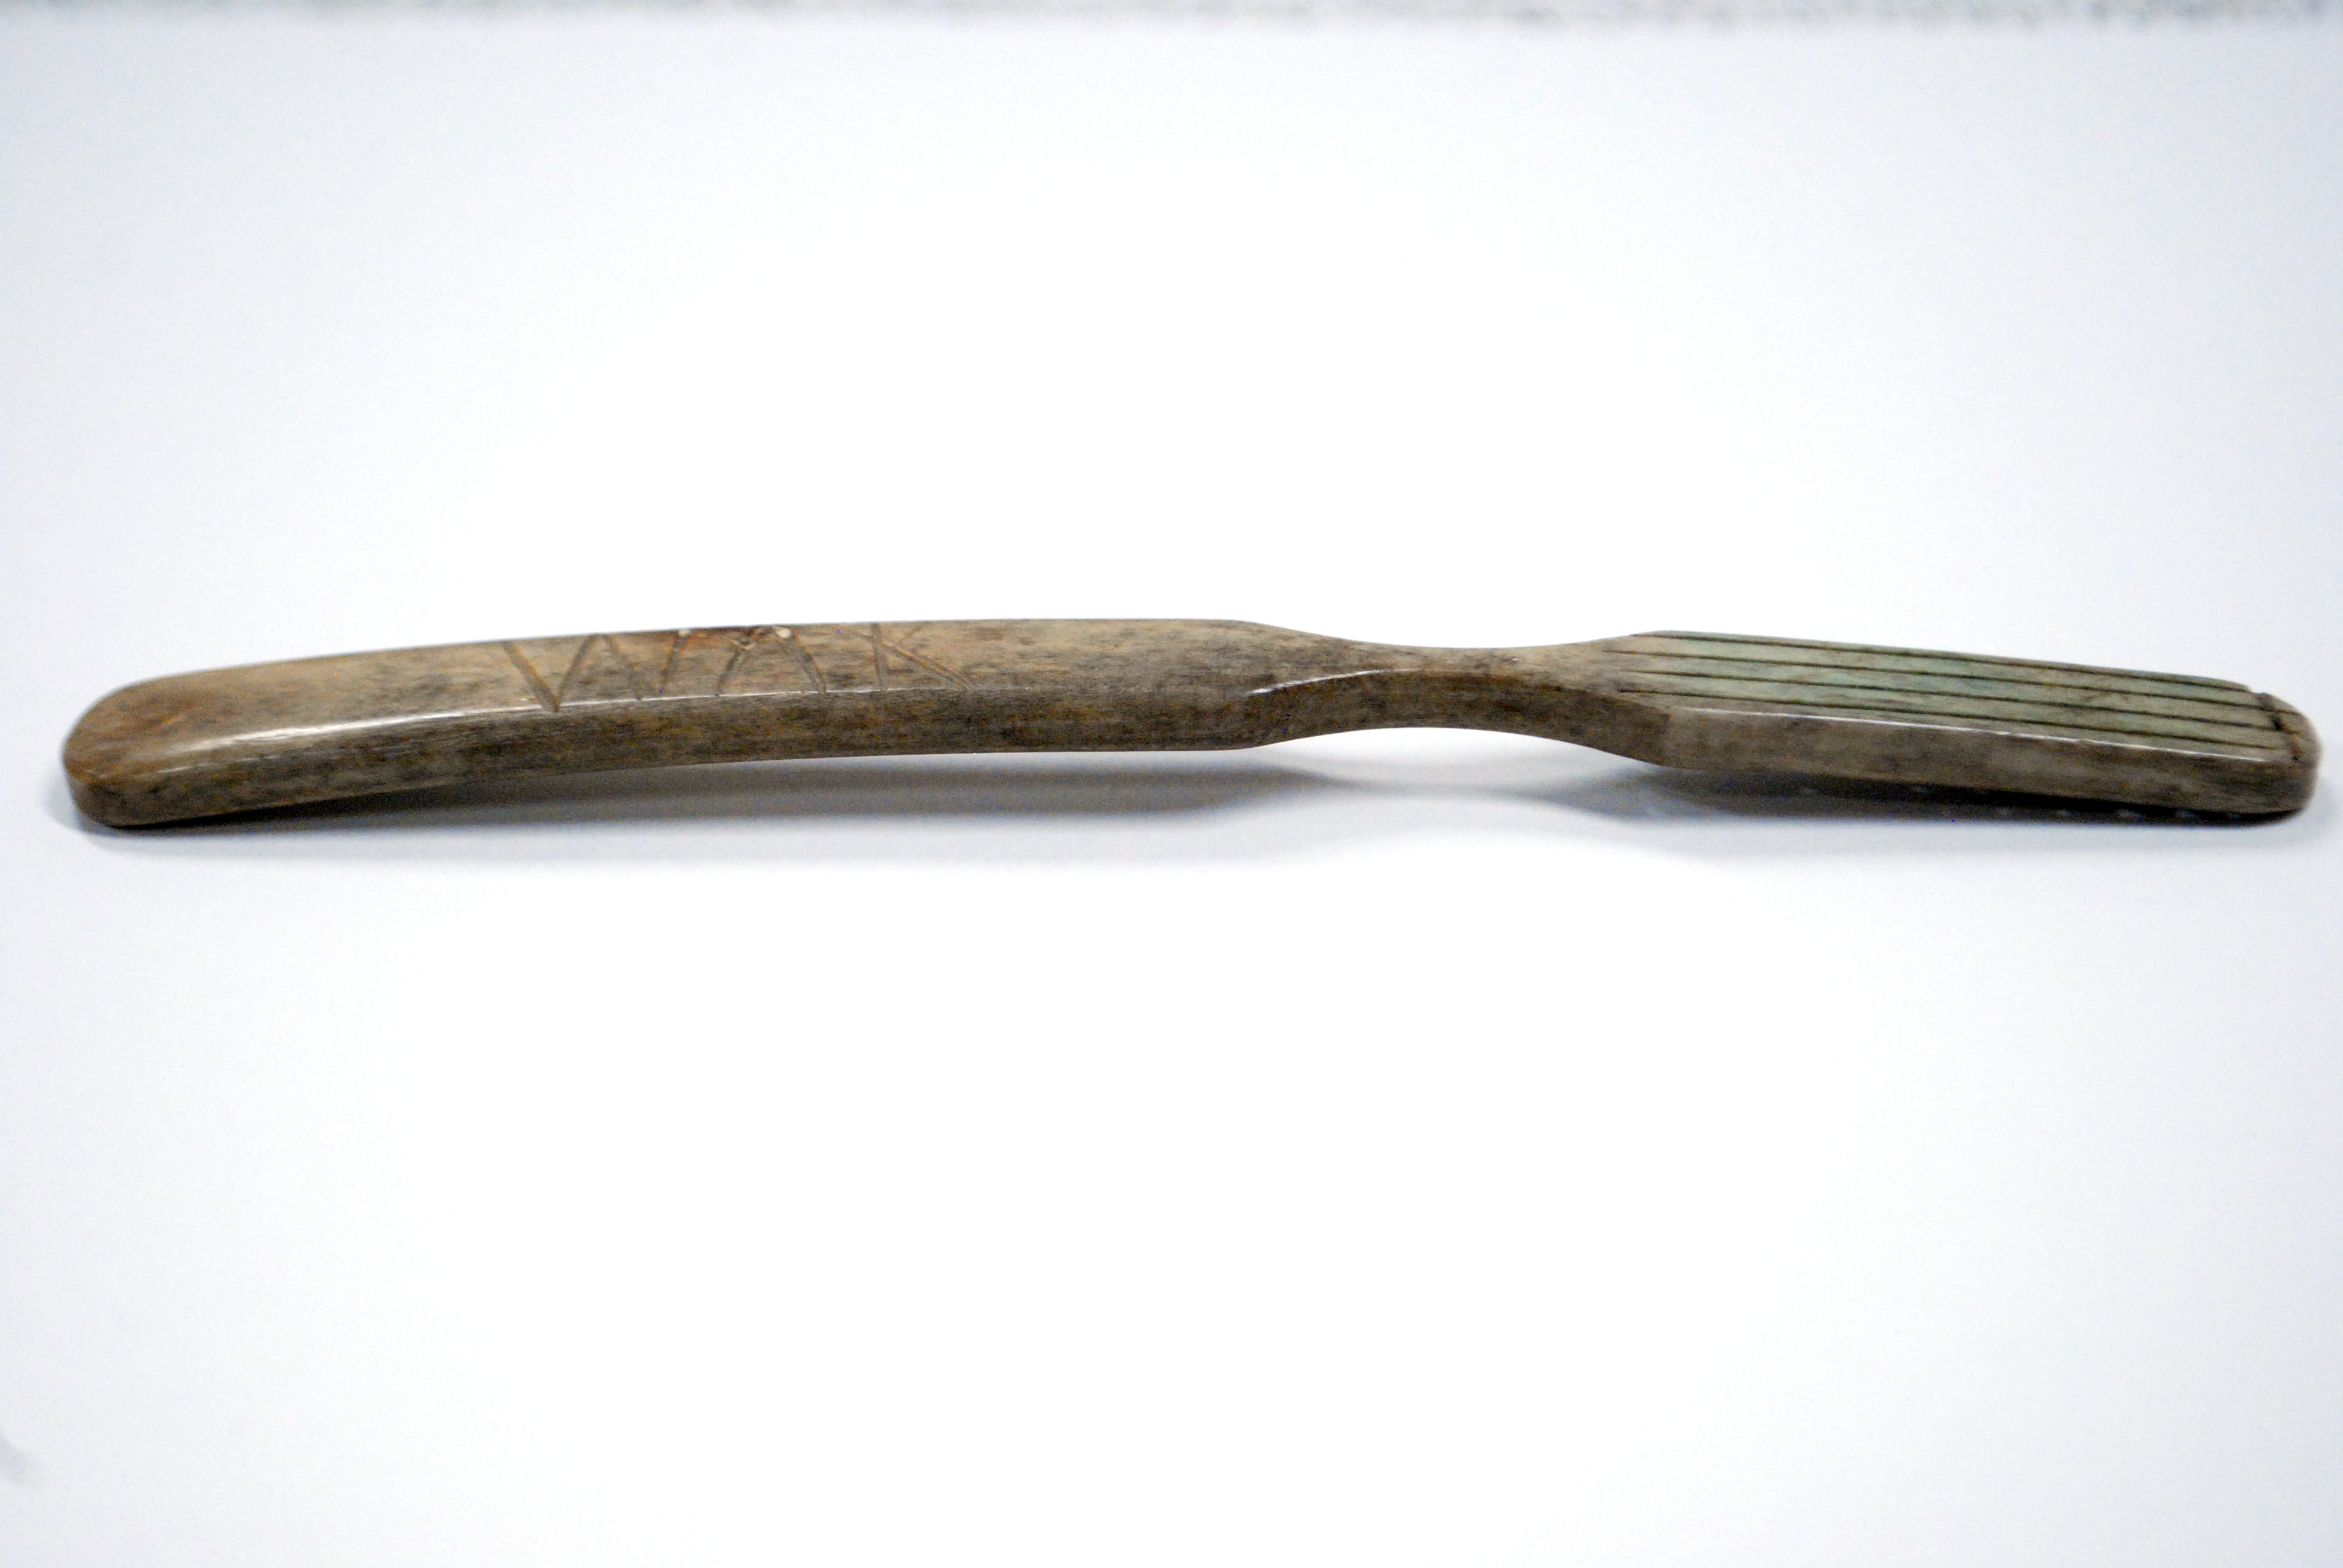 Bone-handled toothbrush, uncovered in 1987 as a part of the Stadt Huys Block
Project.